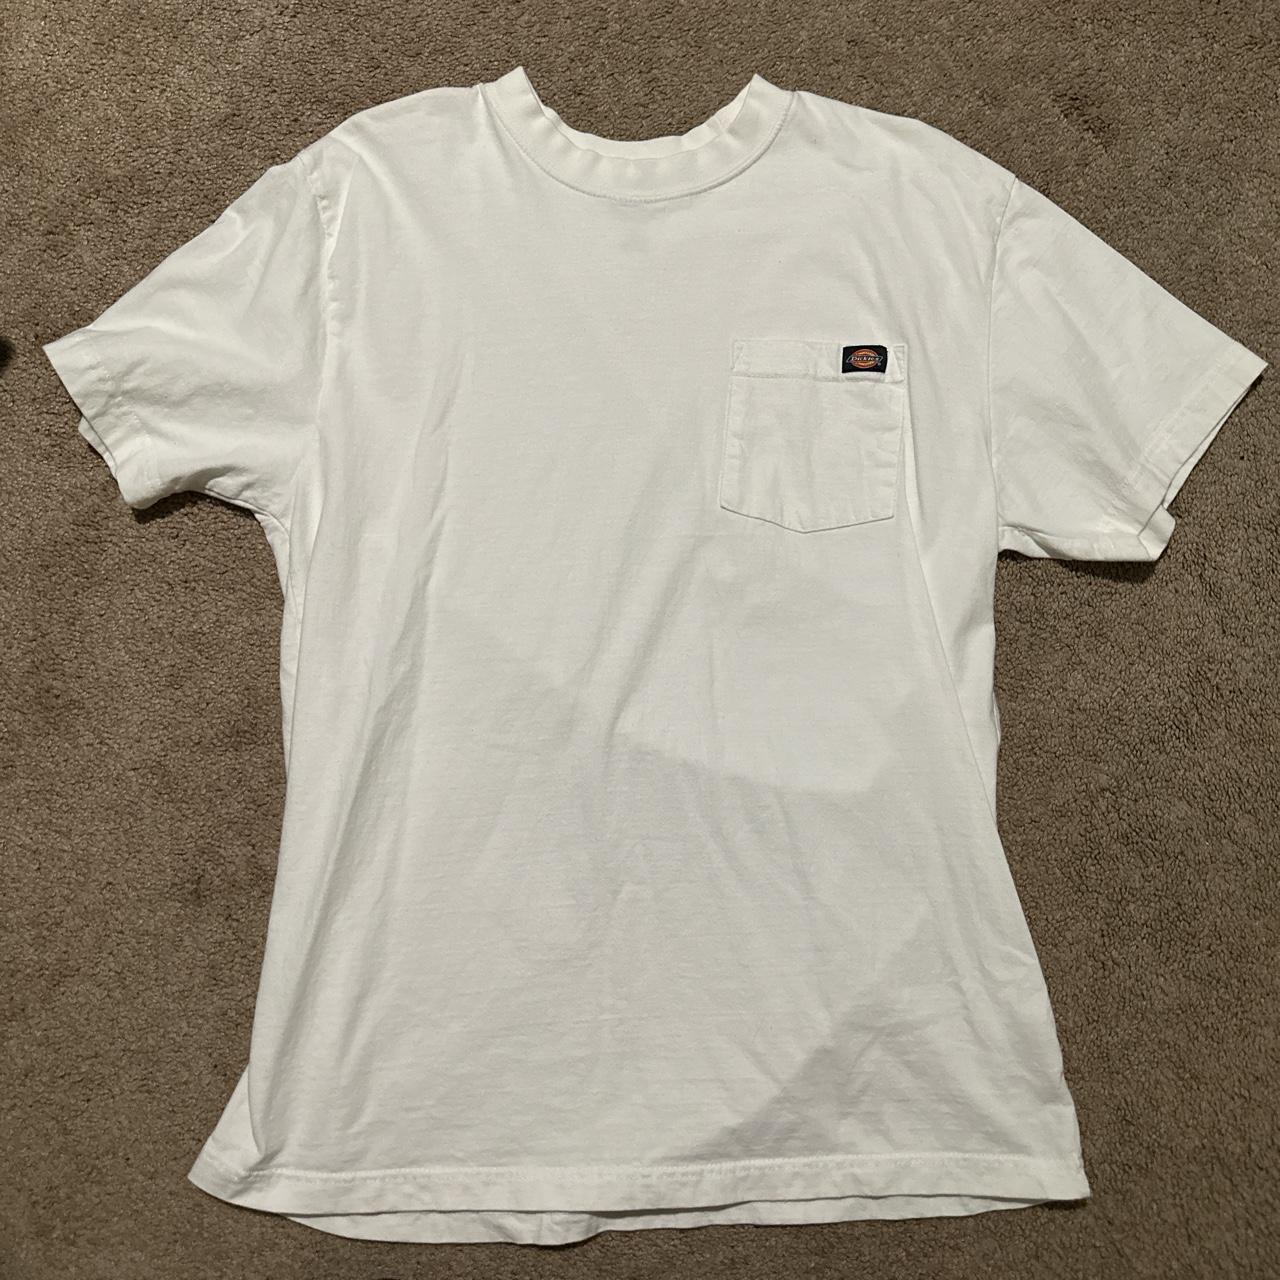 Plain White Large Dickies T-Shirt with Pocket - Depop